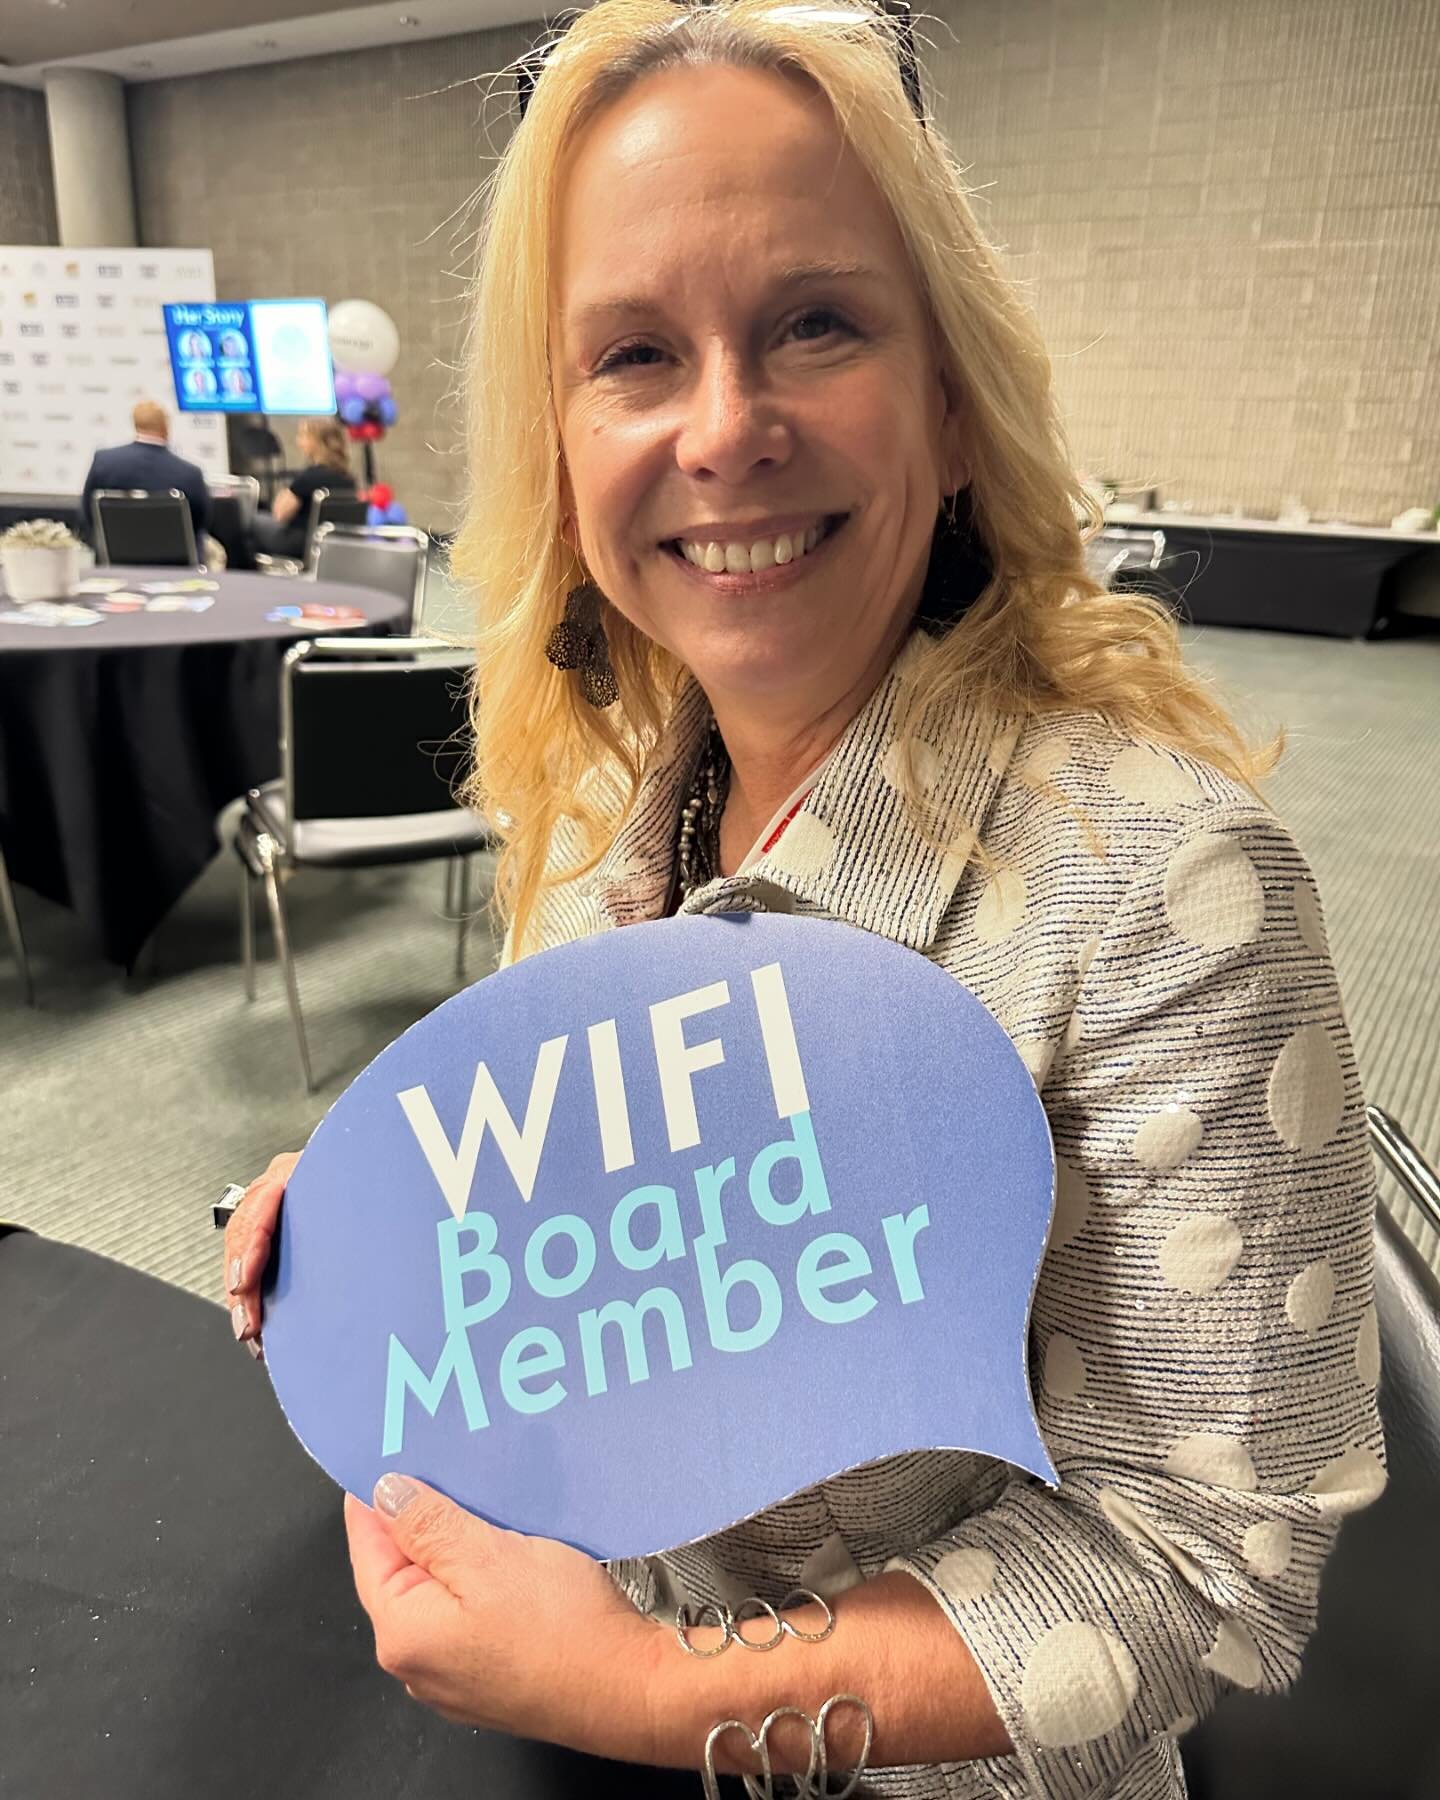 Good to see our board member Athena Walker at the WIFI event Her Story at @coveringsshow this week in ATL! Athena also was part of a panel on networking and ROCKED IT!

WIFI is a 501c3 educational non-profit whose mission is to attract, educate, and 